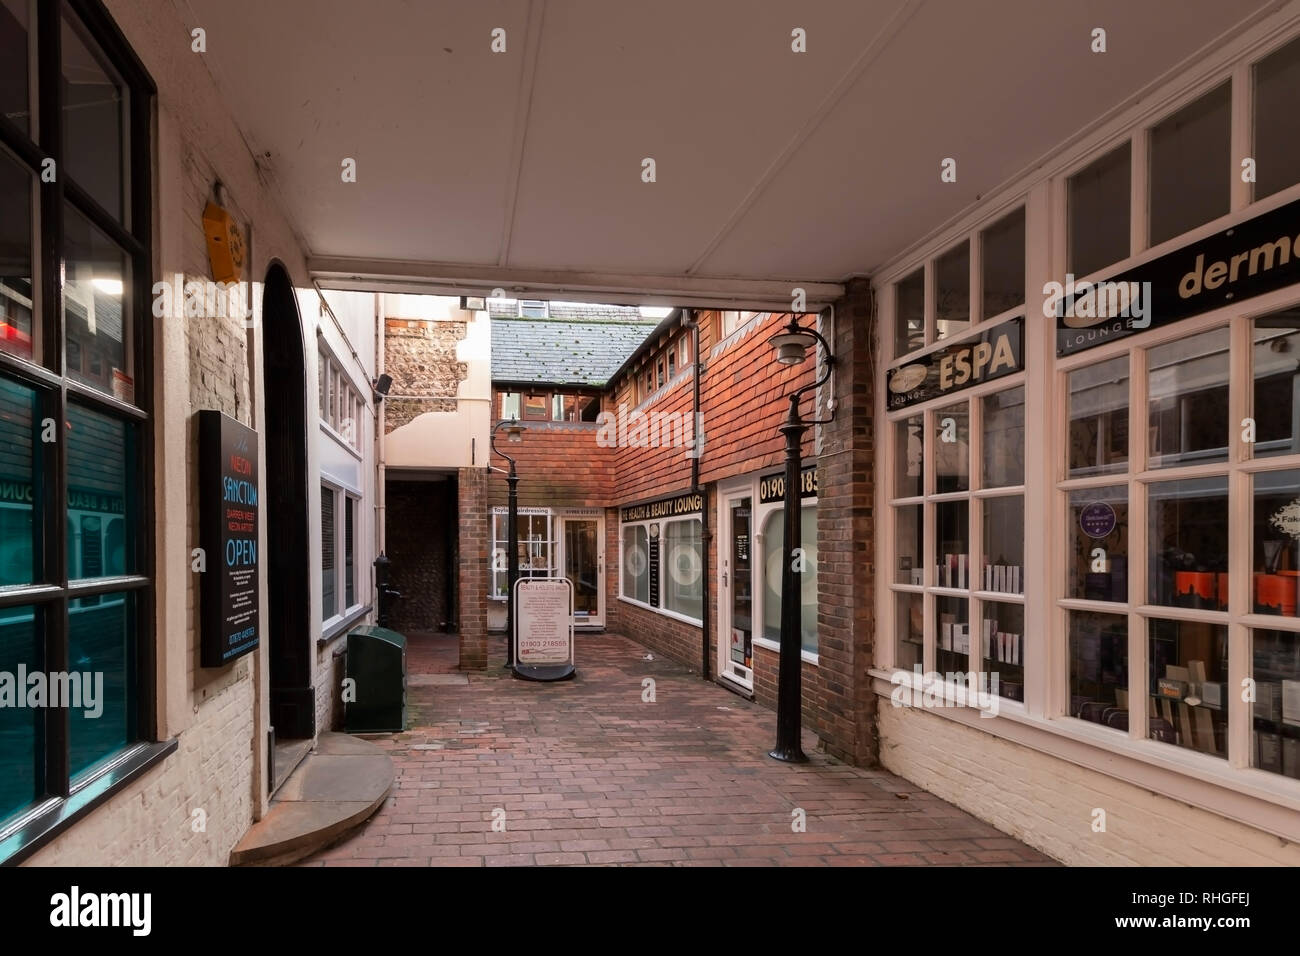 Urban view of Worthing, West Sussex, UK featuring an alleyway of shops Stock Photo